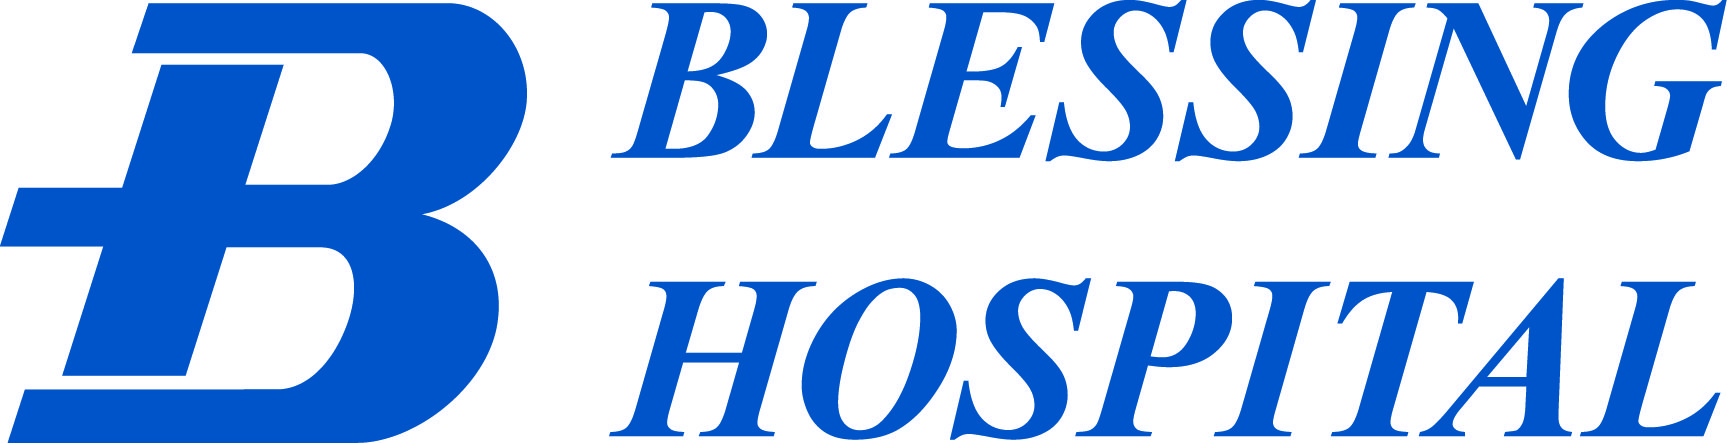 blessing health system